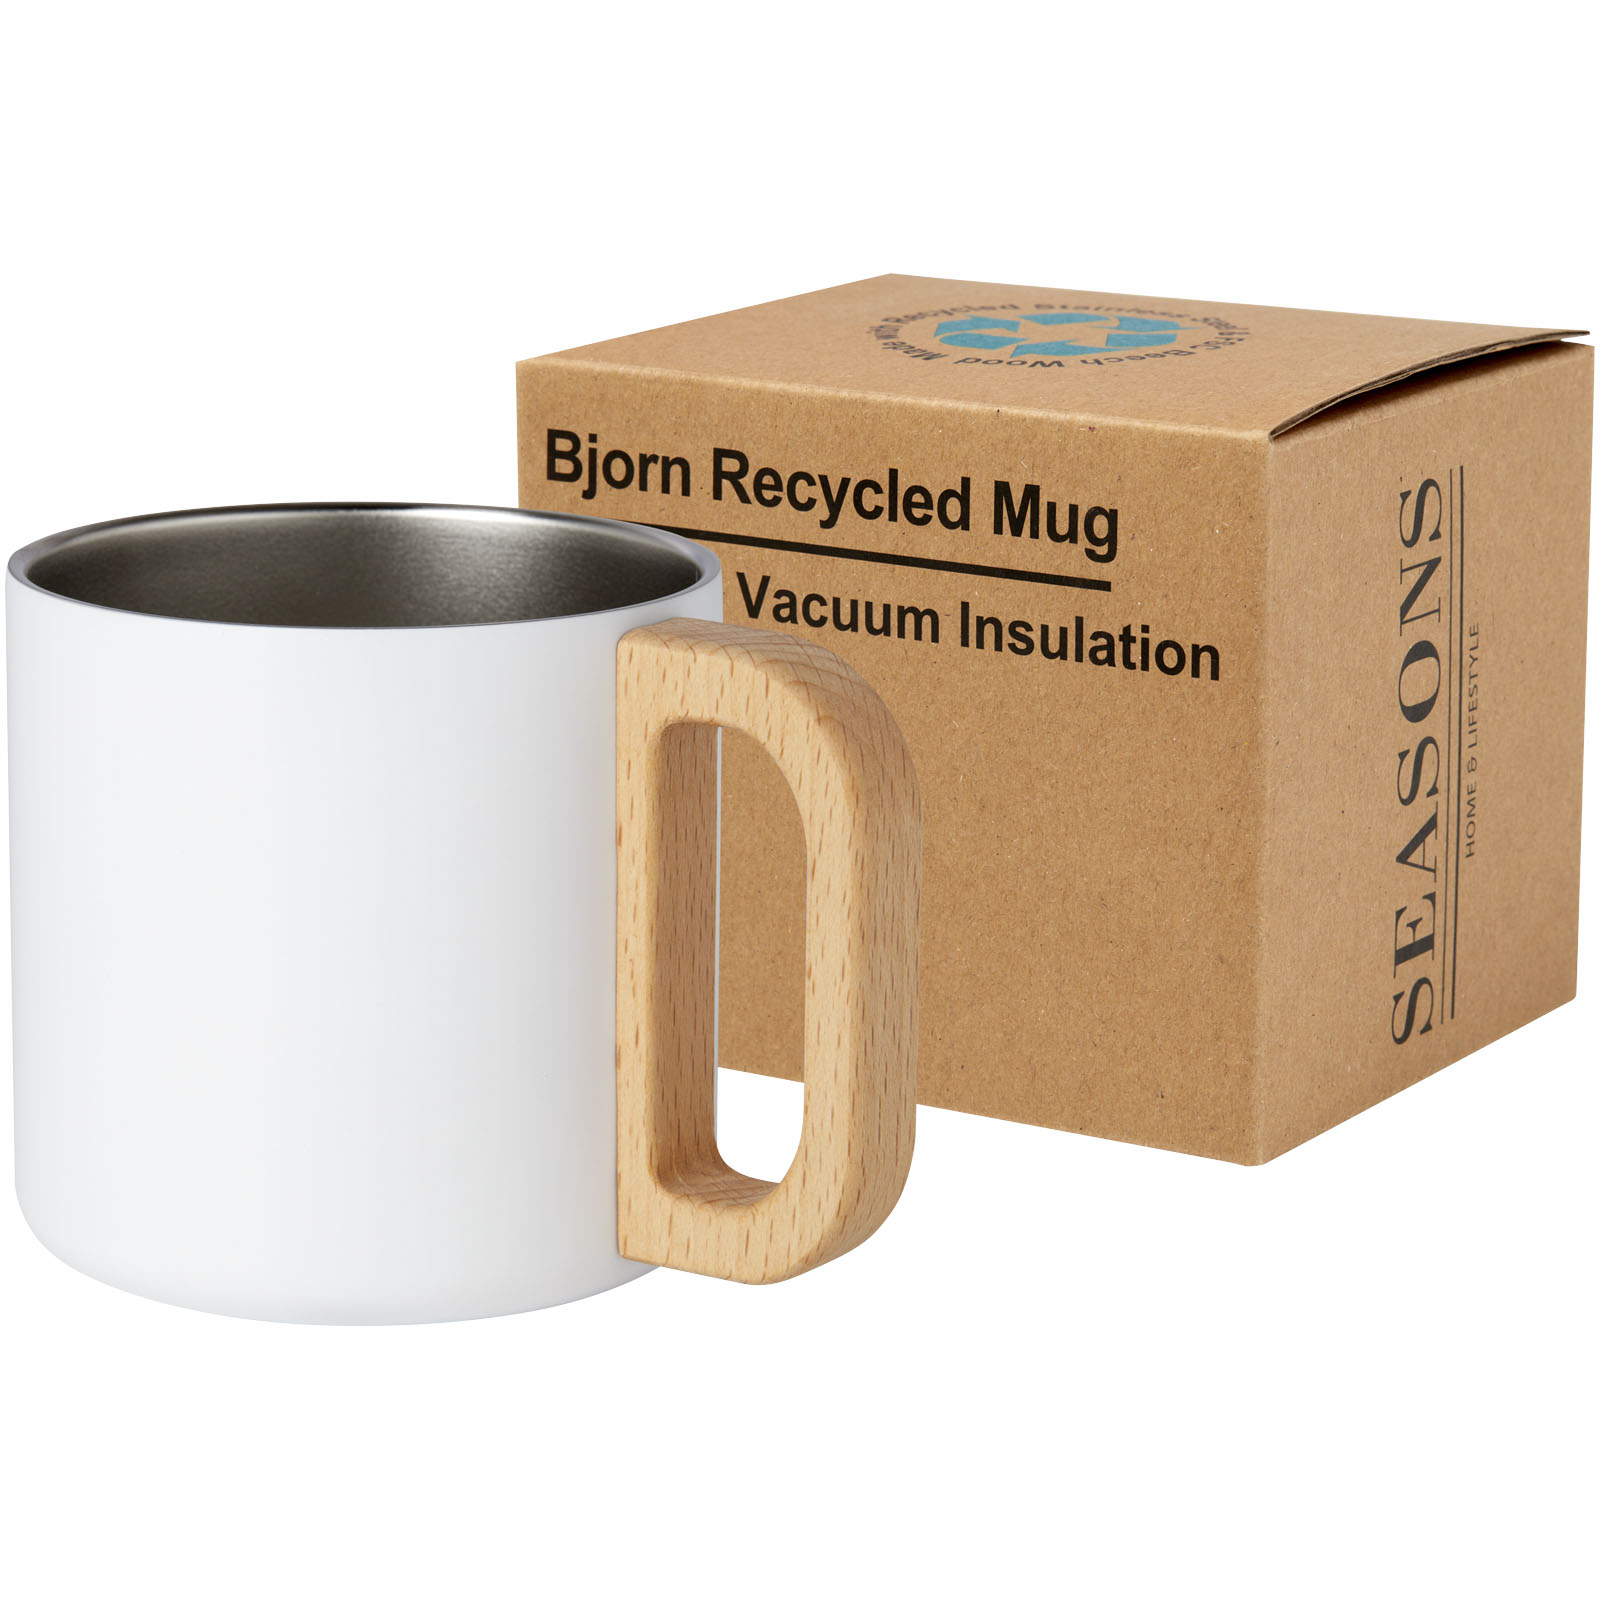 Advertising Insulated mugs - Bjorn 360 ml RCS certified recycled stainless steel mug with copper vacuum insulation